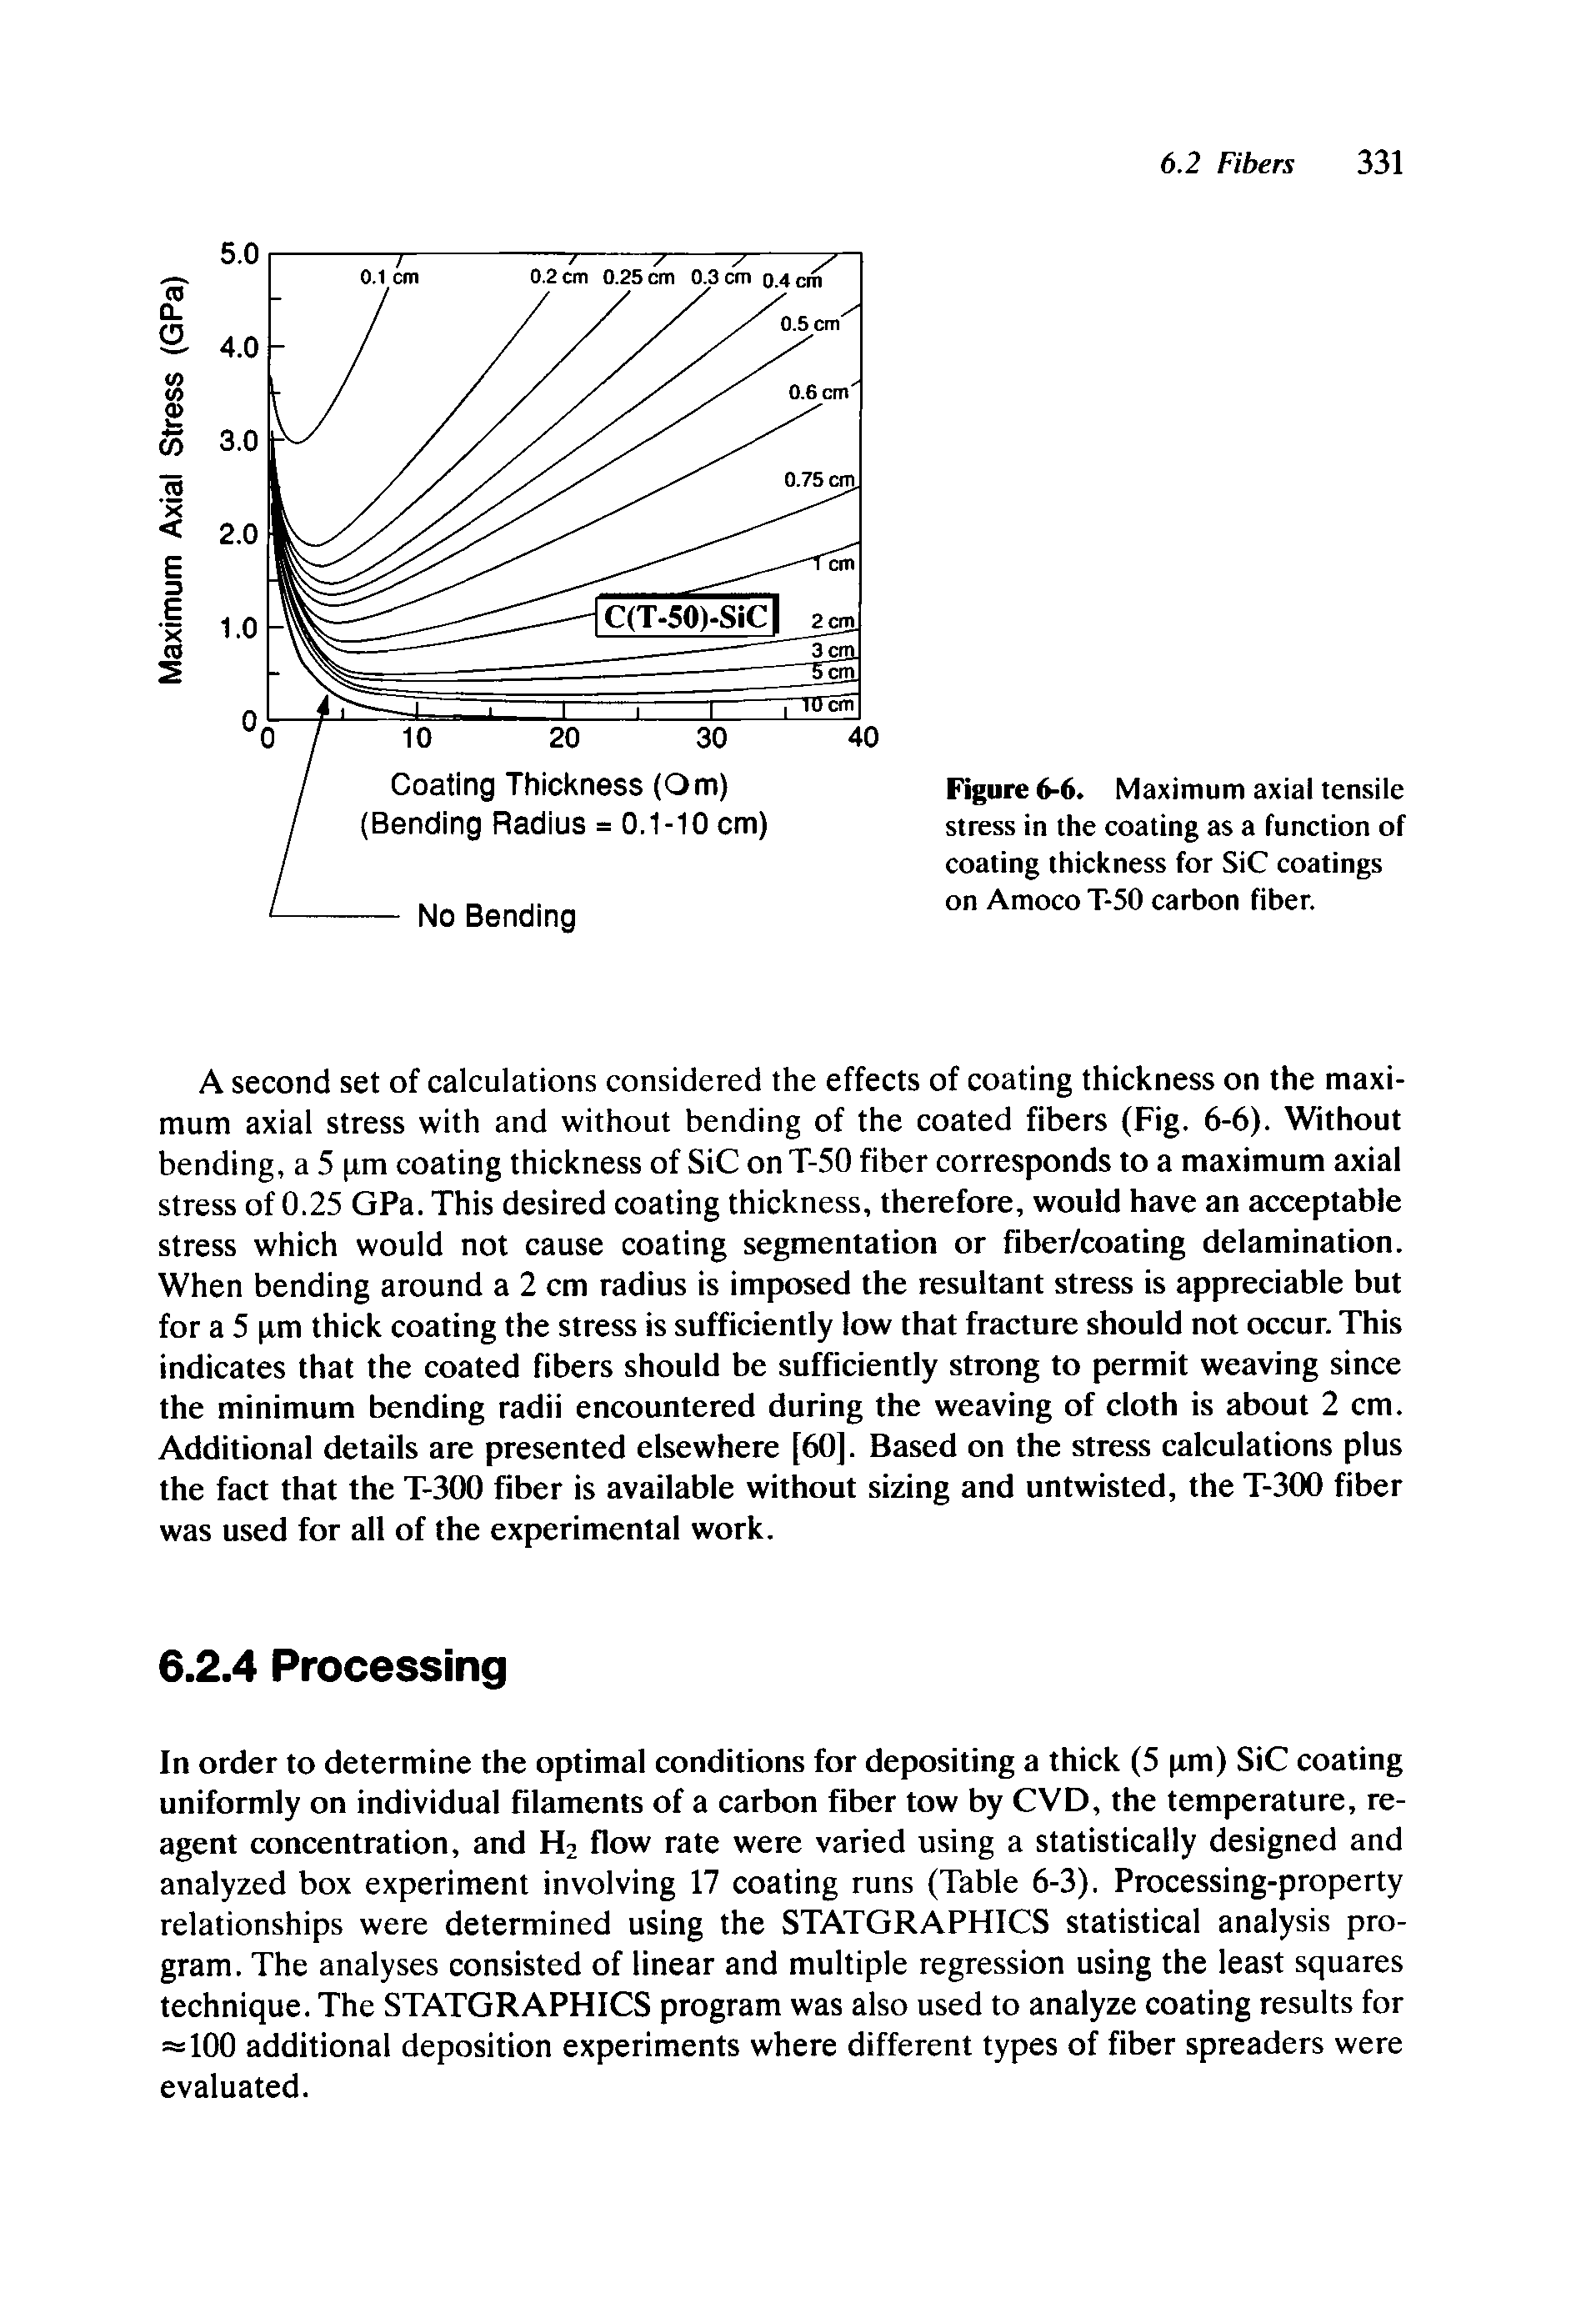 Figure 6-6. Maximum axial tensile stress in the coating as a function of coating thickness for SiC coatings on Amoco T-50 carbon fiber.